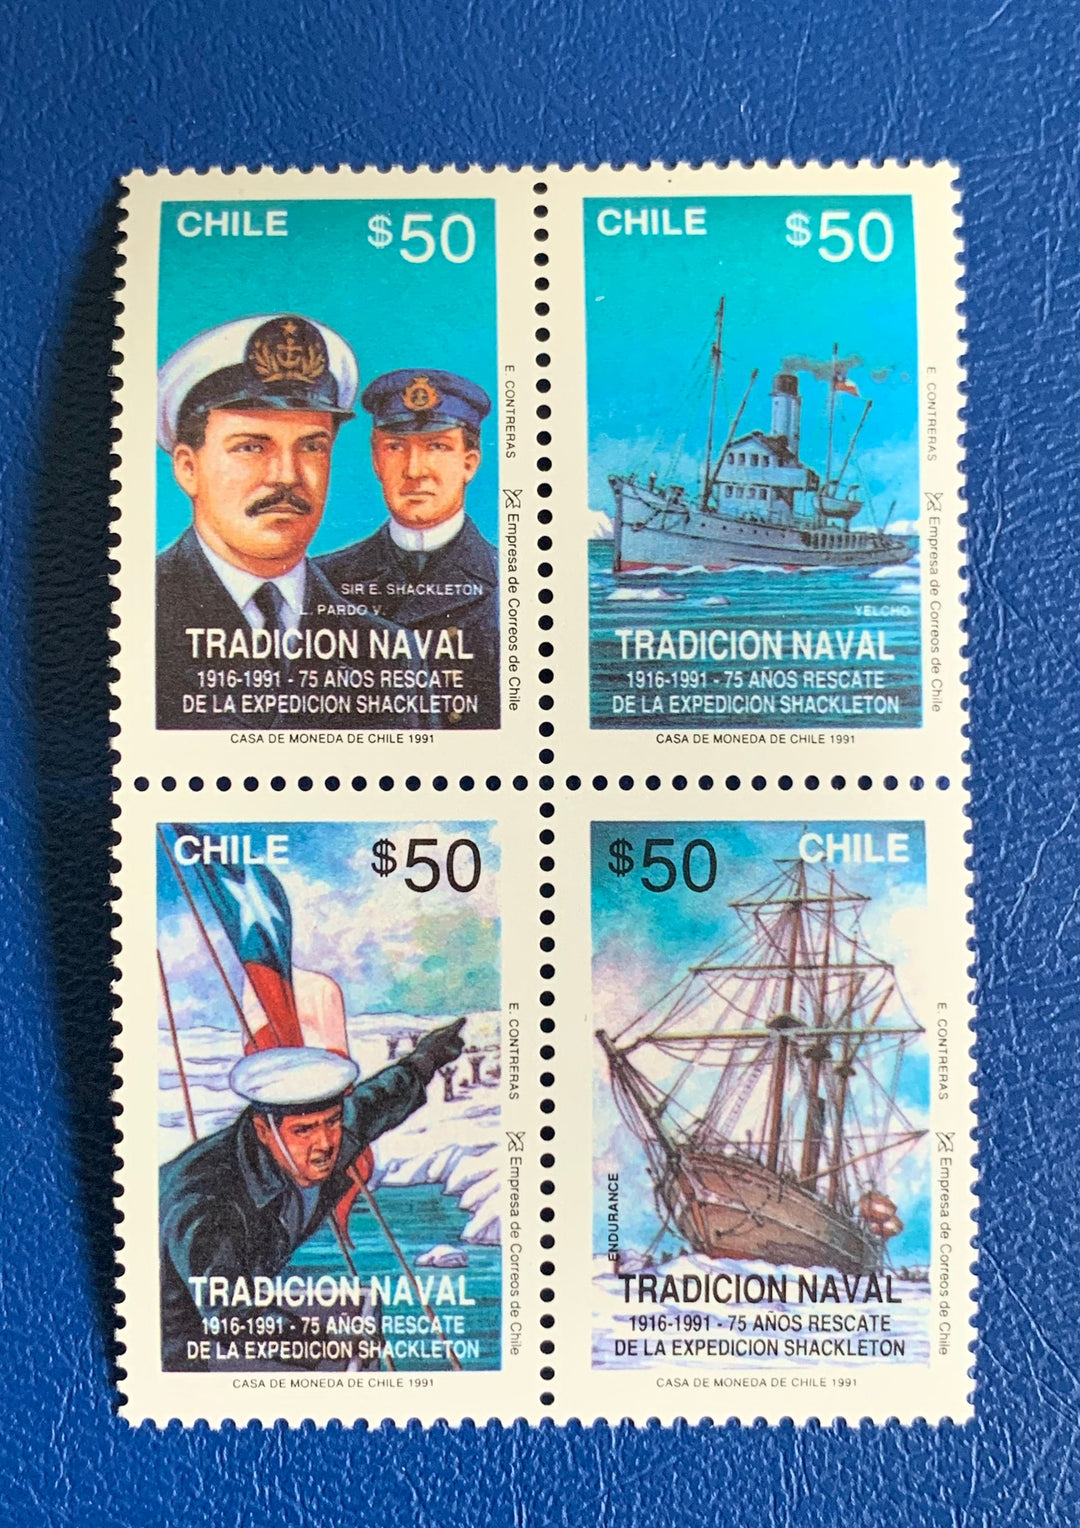 Chile - Original Vintage Postage Stamps- 1991 - Naval History - for the collector, artist or crafter